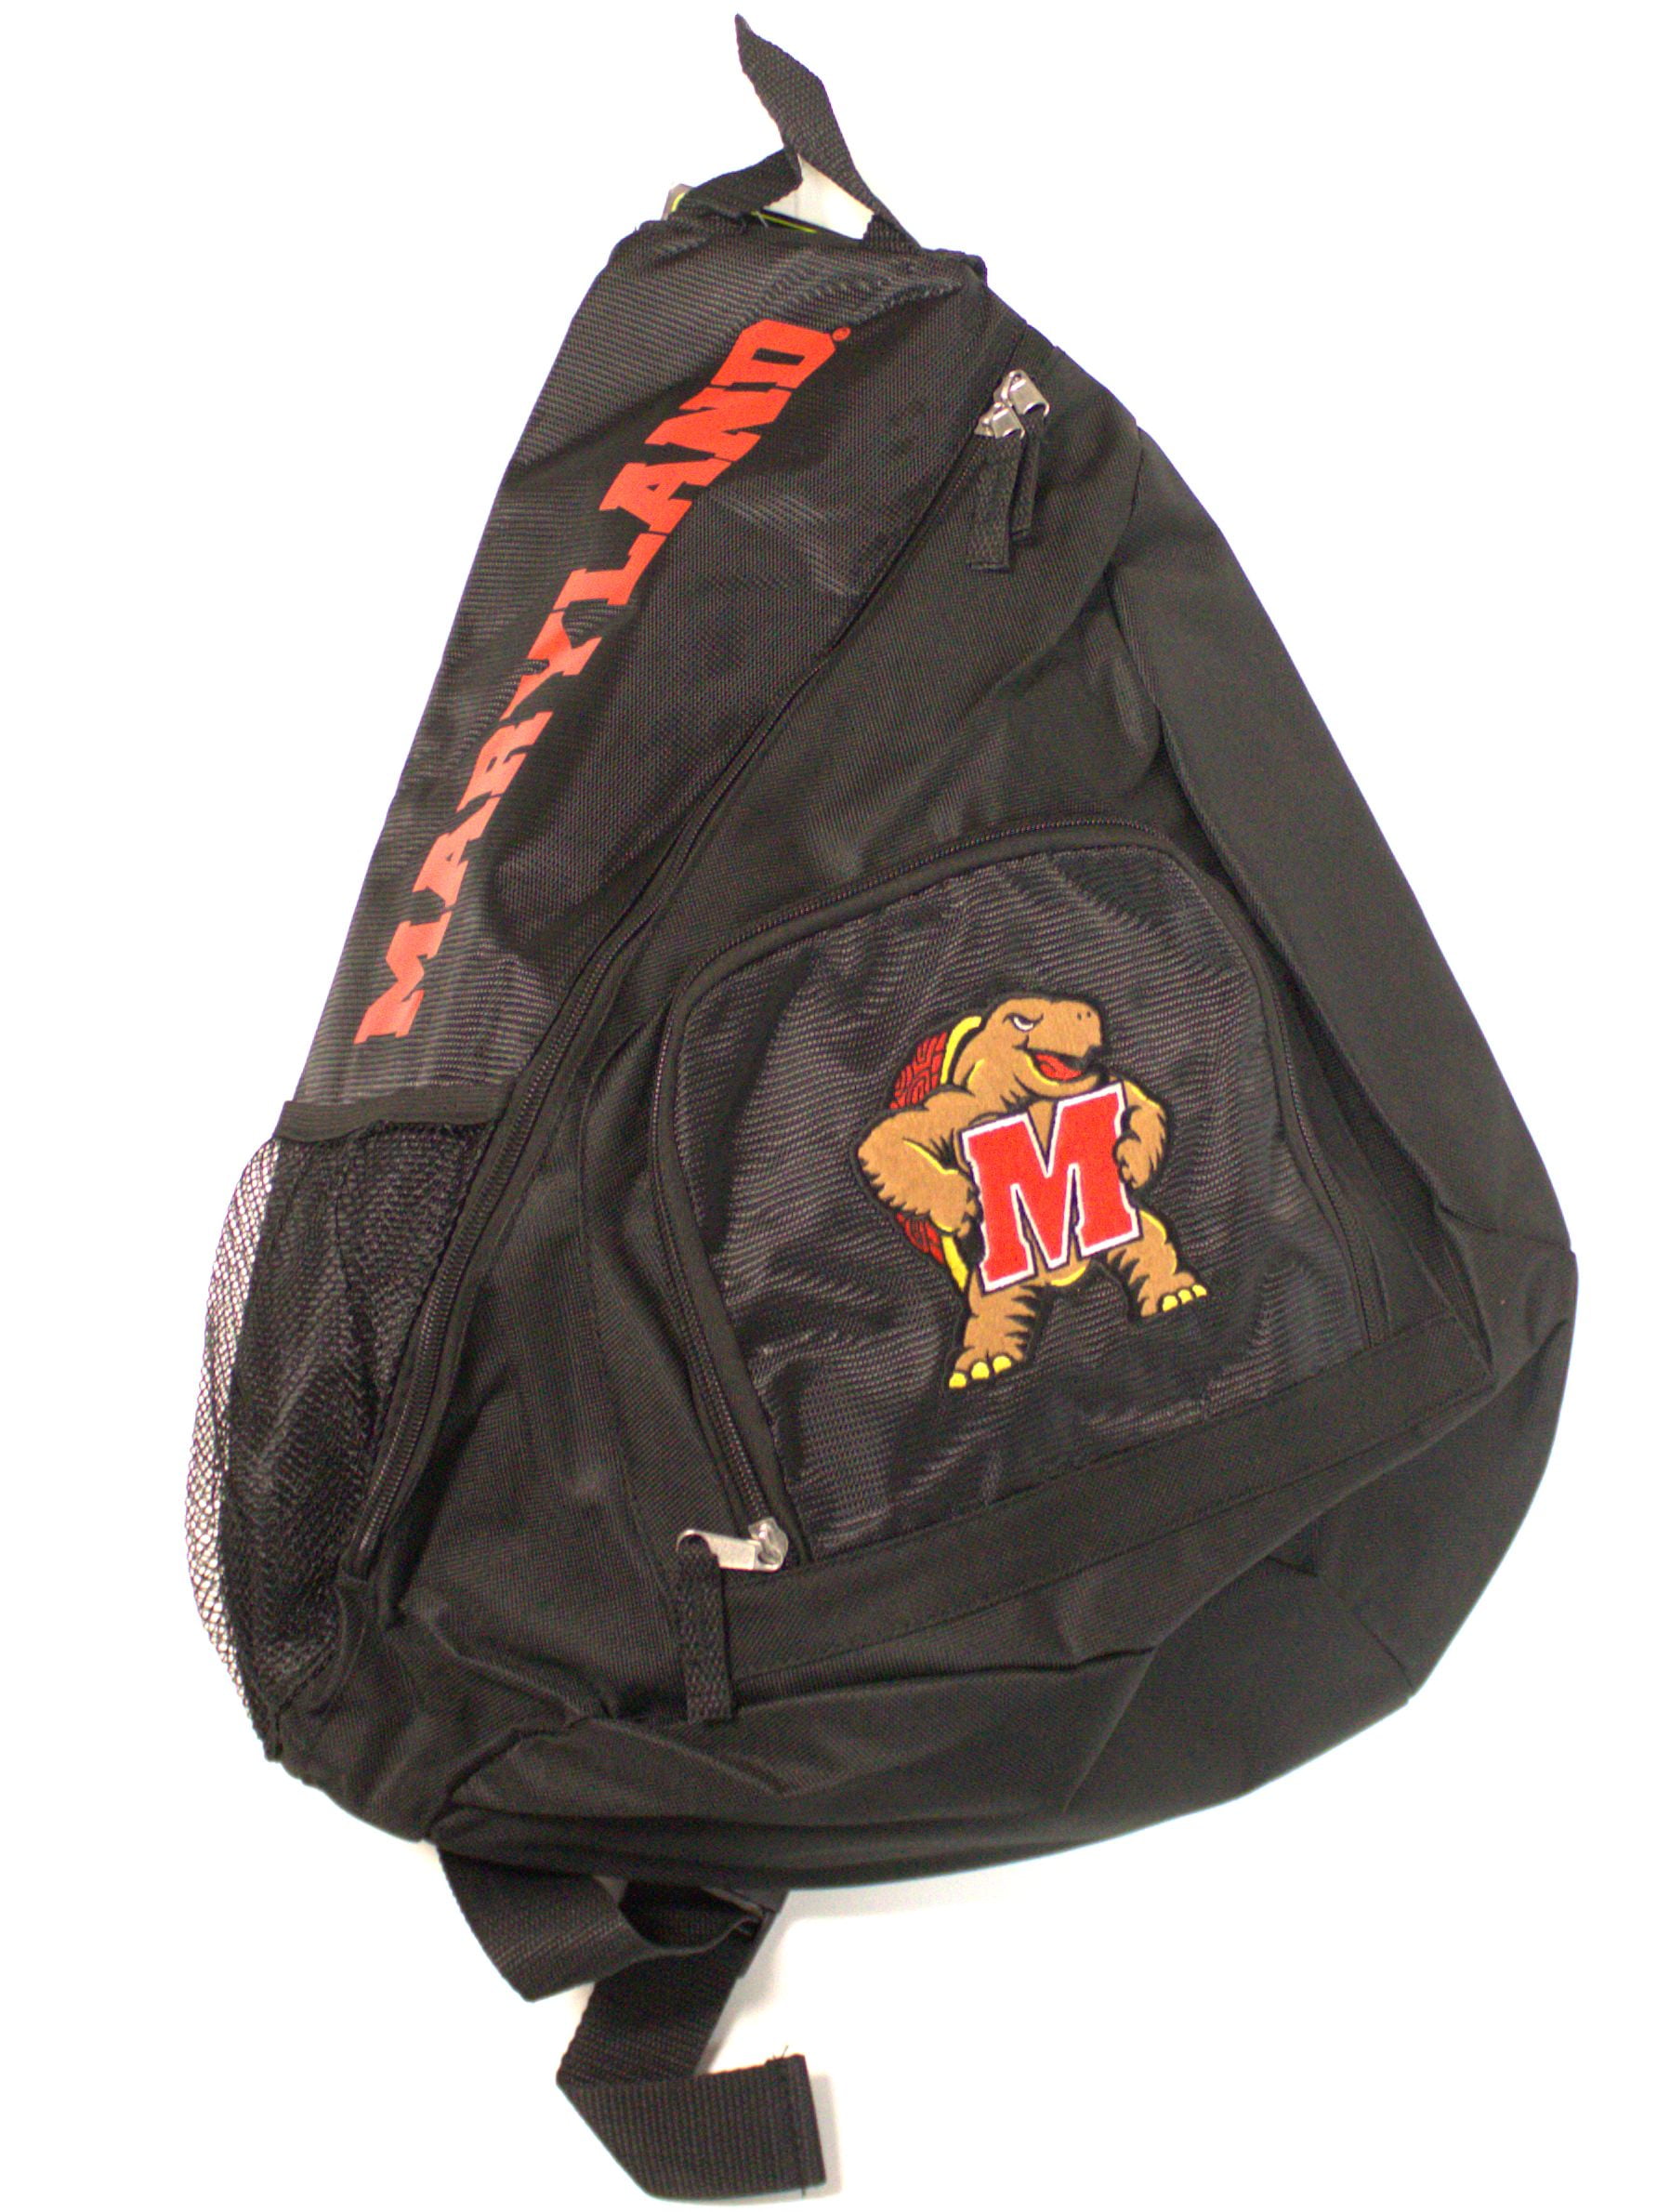 Concept One Accessories NCAA Offense Mini Backpack 